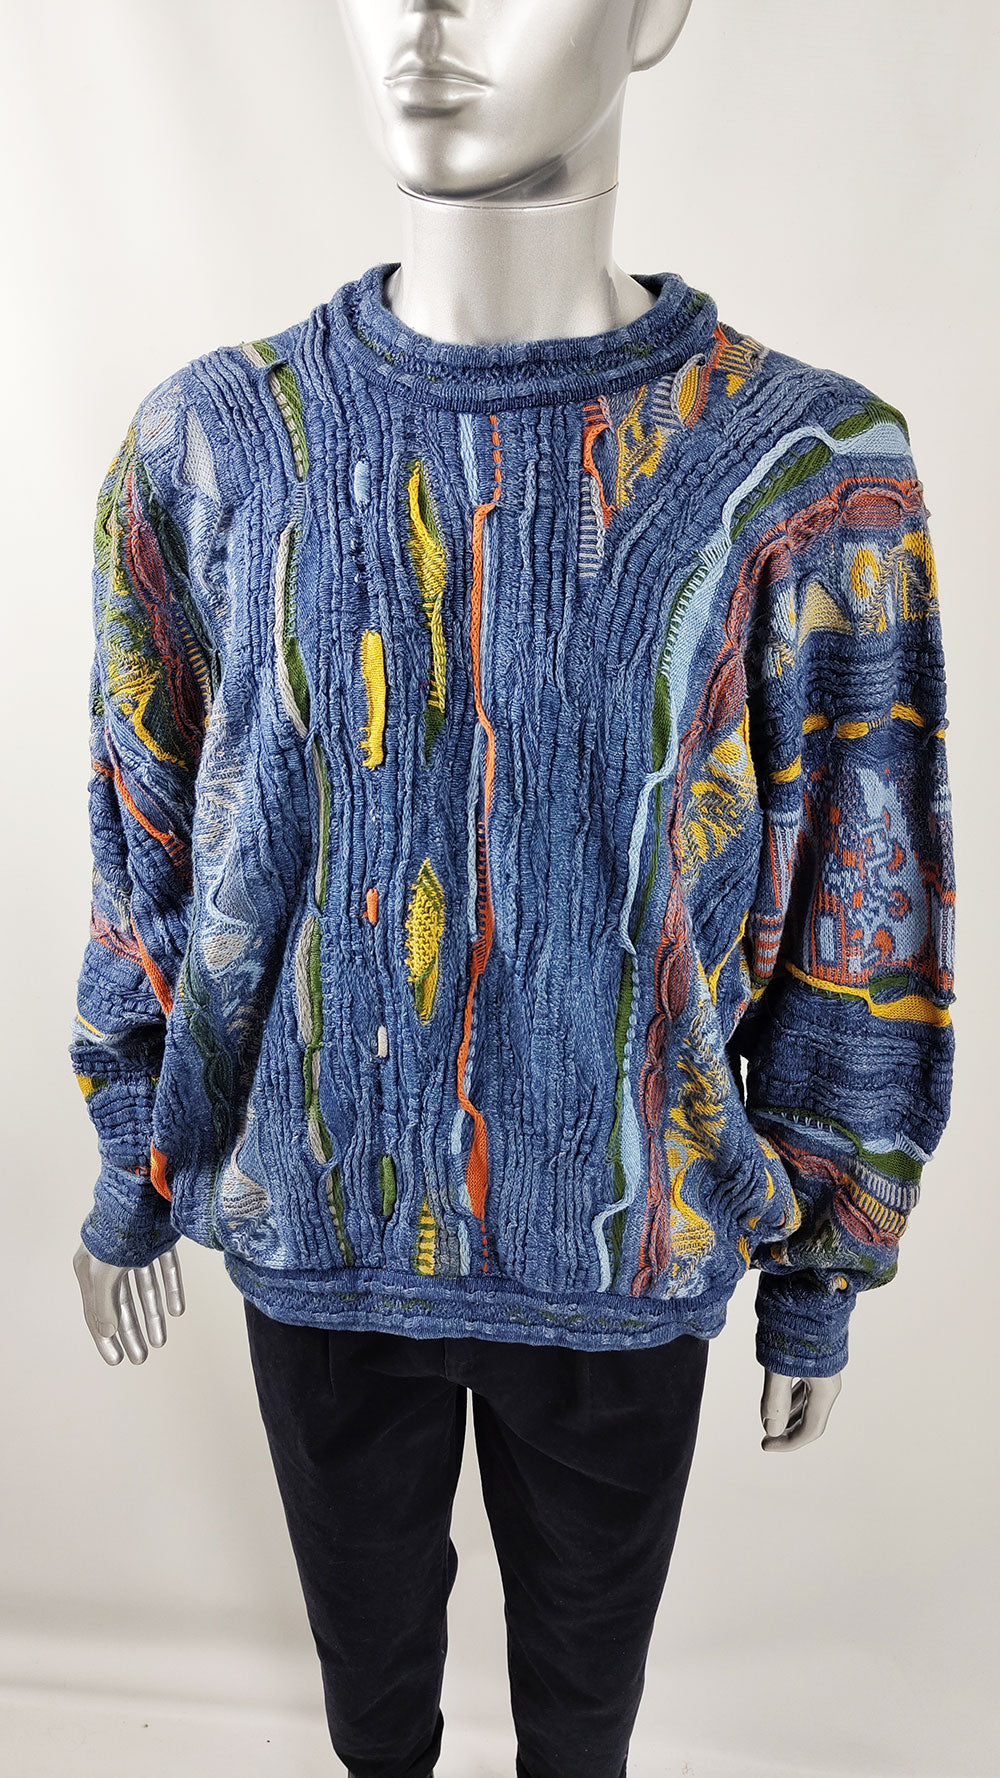 A male mannequin wearing a vintage Coogi sweater in a blue texture knit.